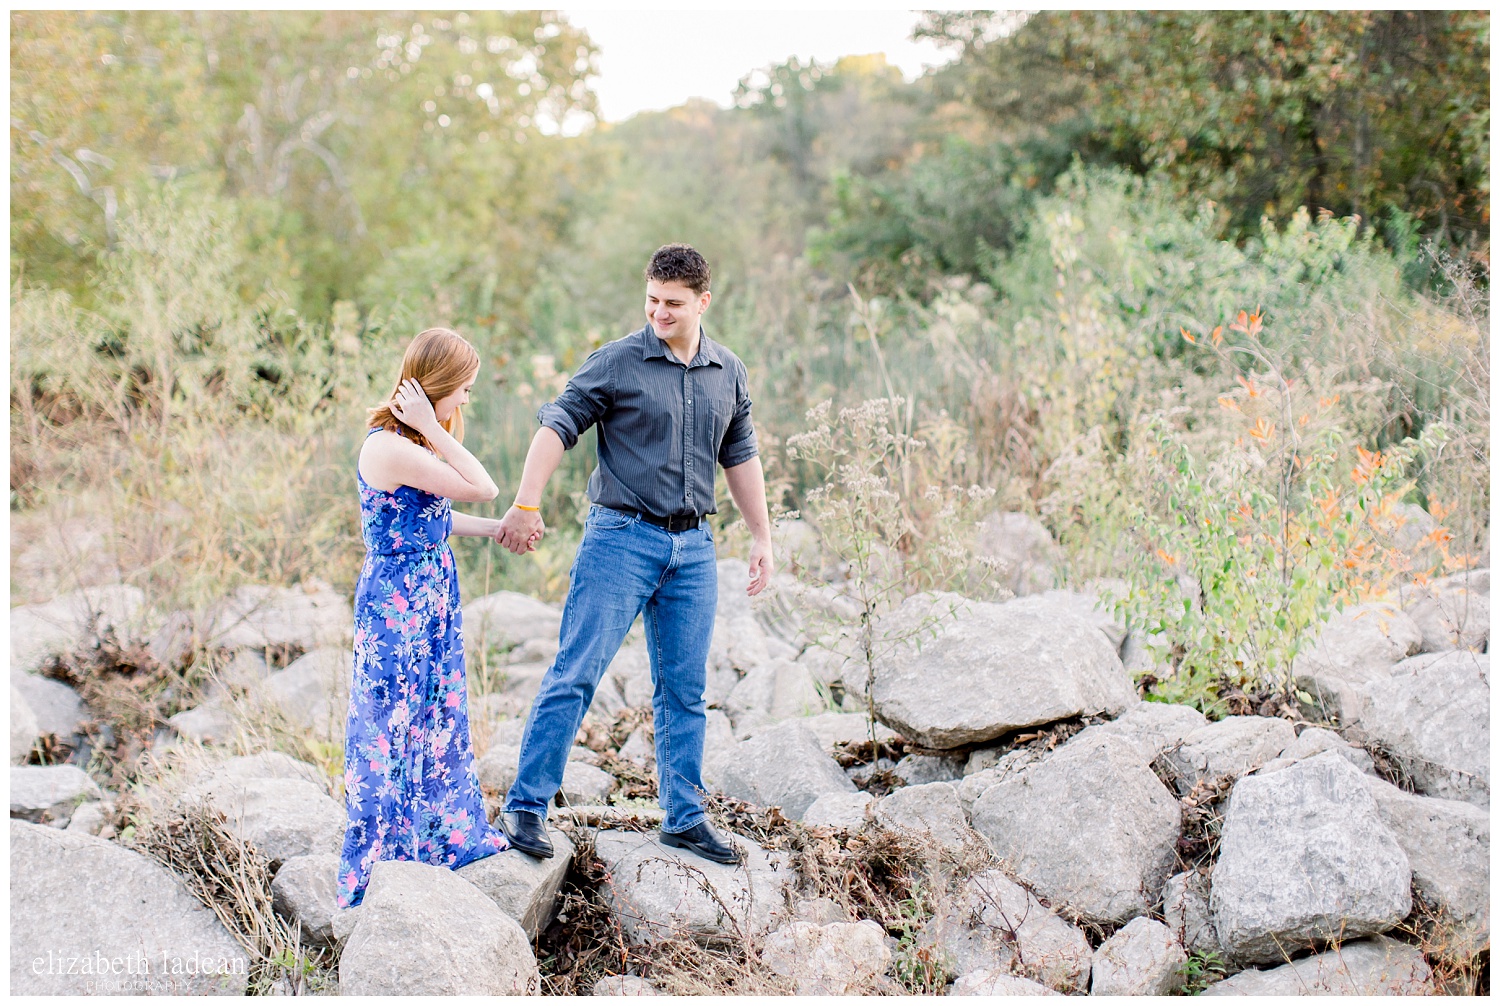 Northland-KC-Fall-Engagement-Photos-with-dog-A+B-2018-elizabeth-ladean-photography-photo_1497.jpg